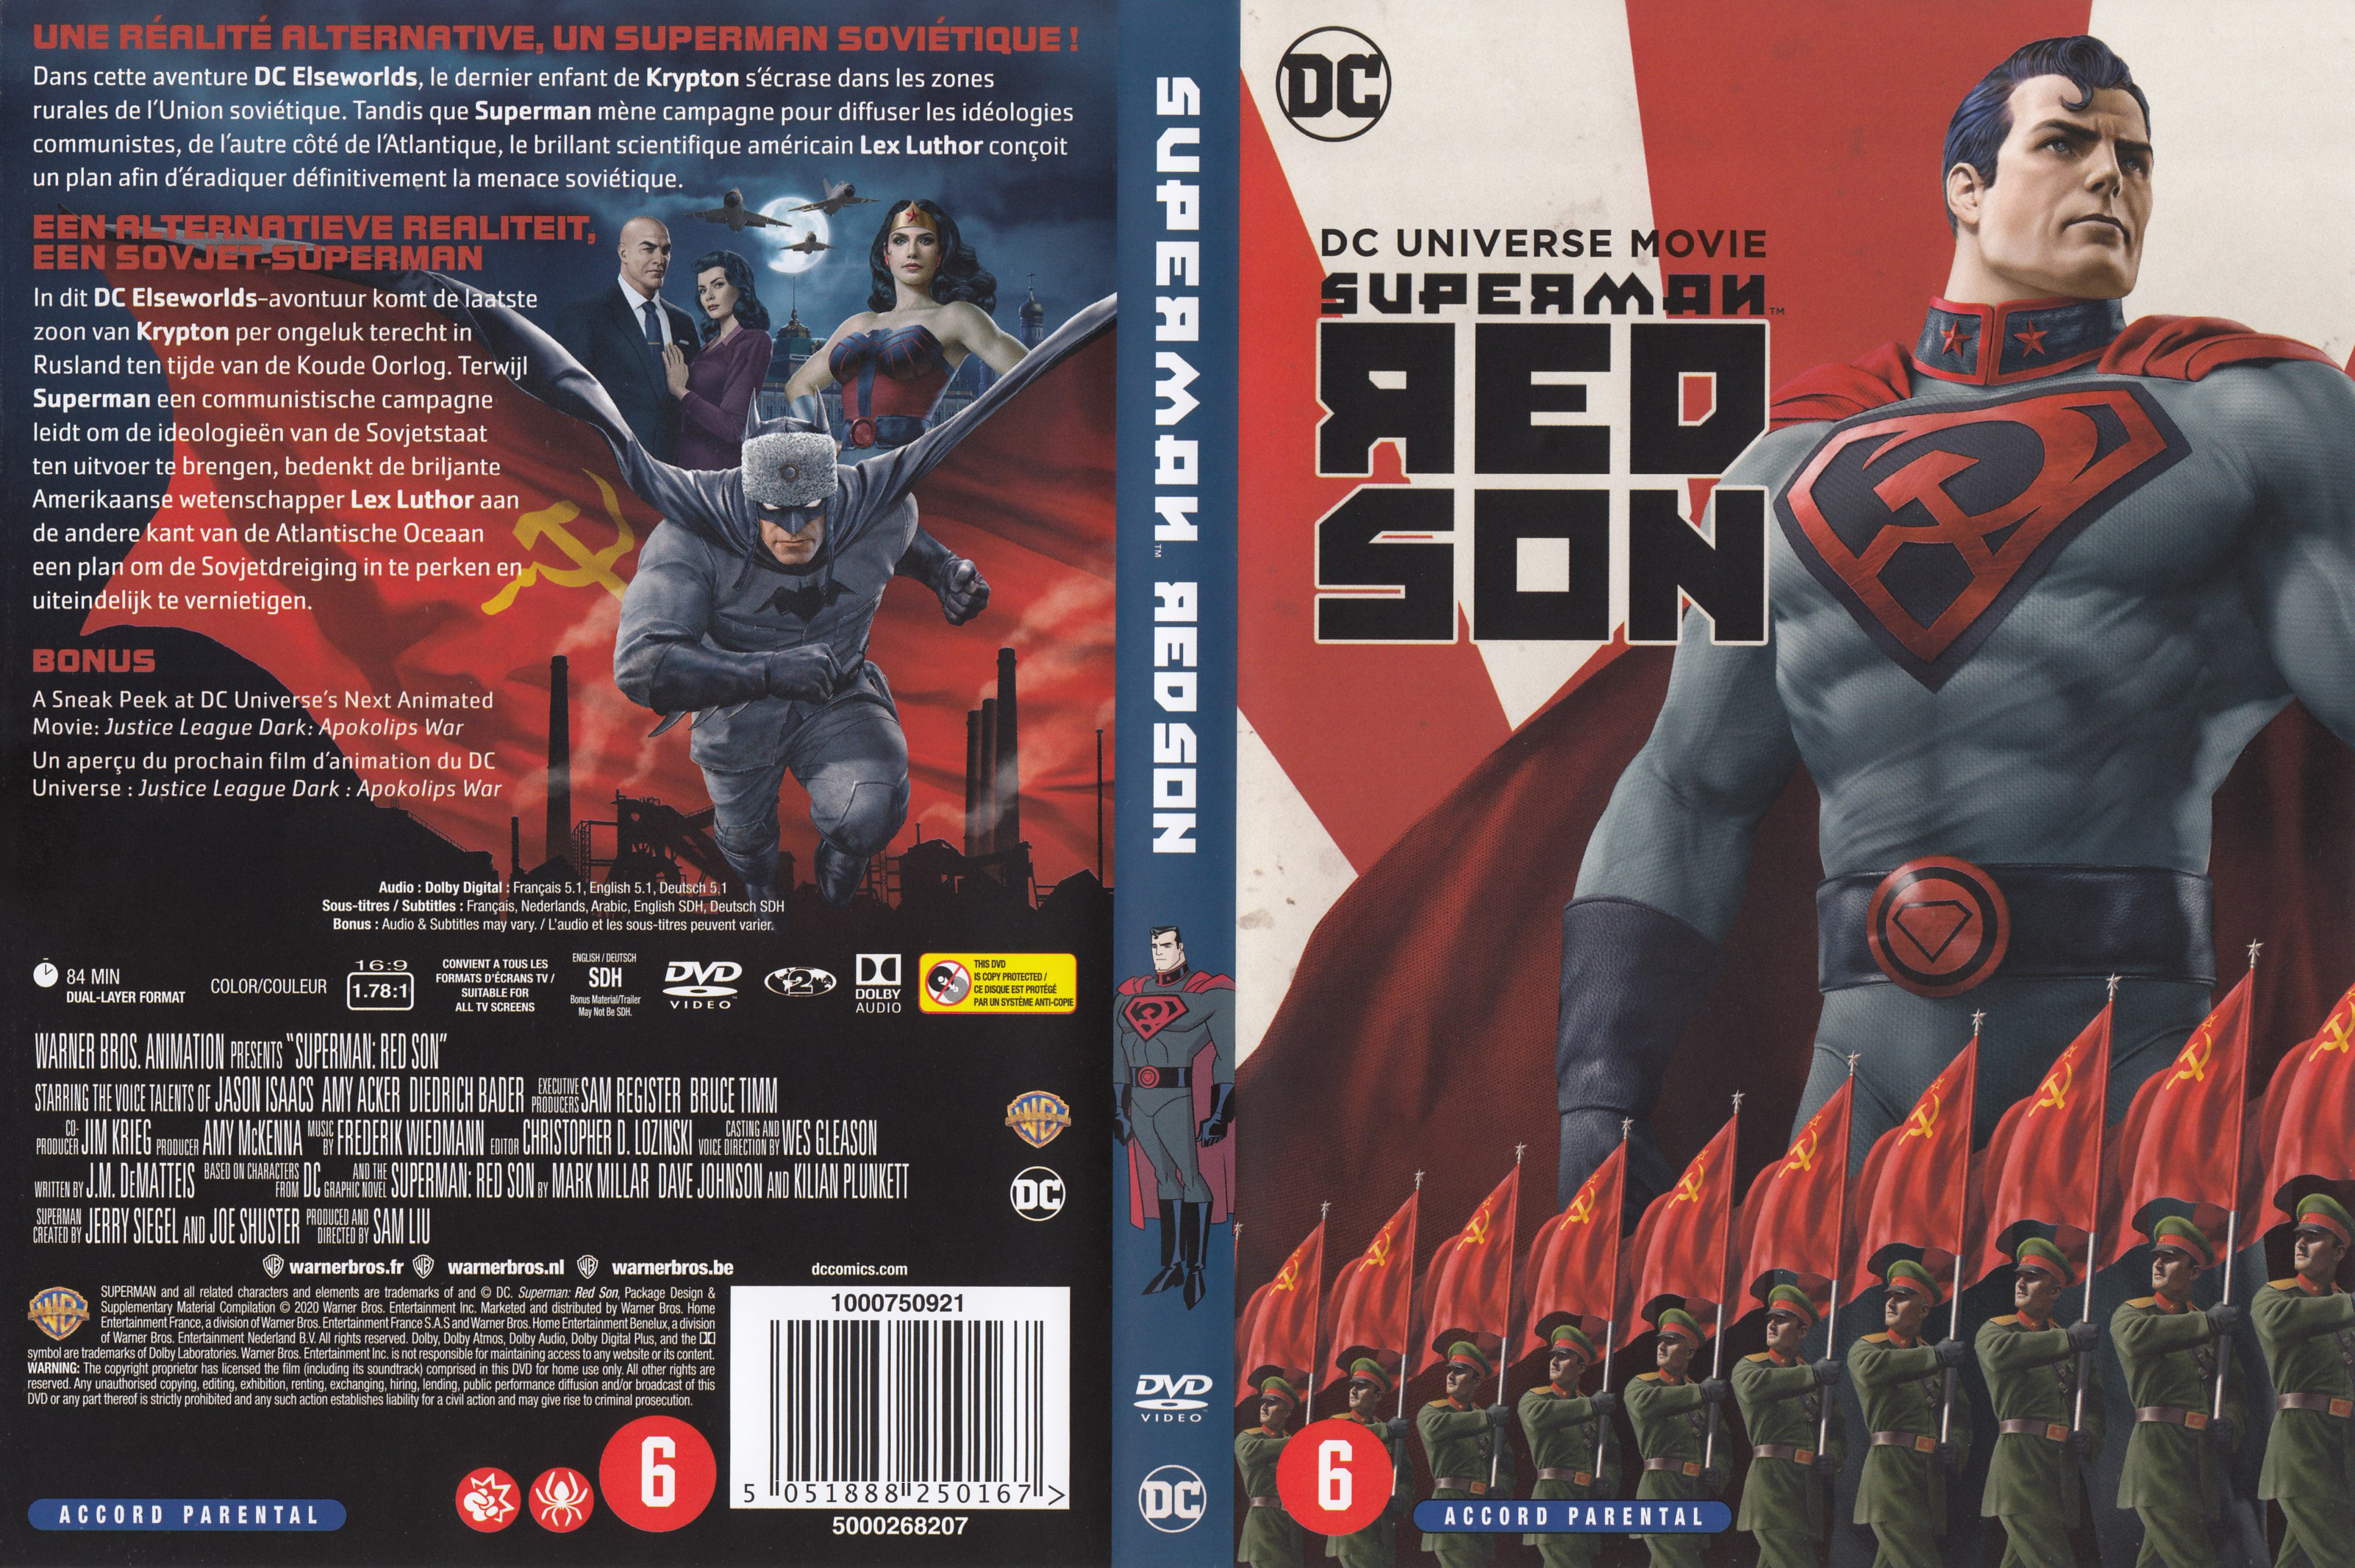 Jaquette DVD Superman red son